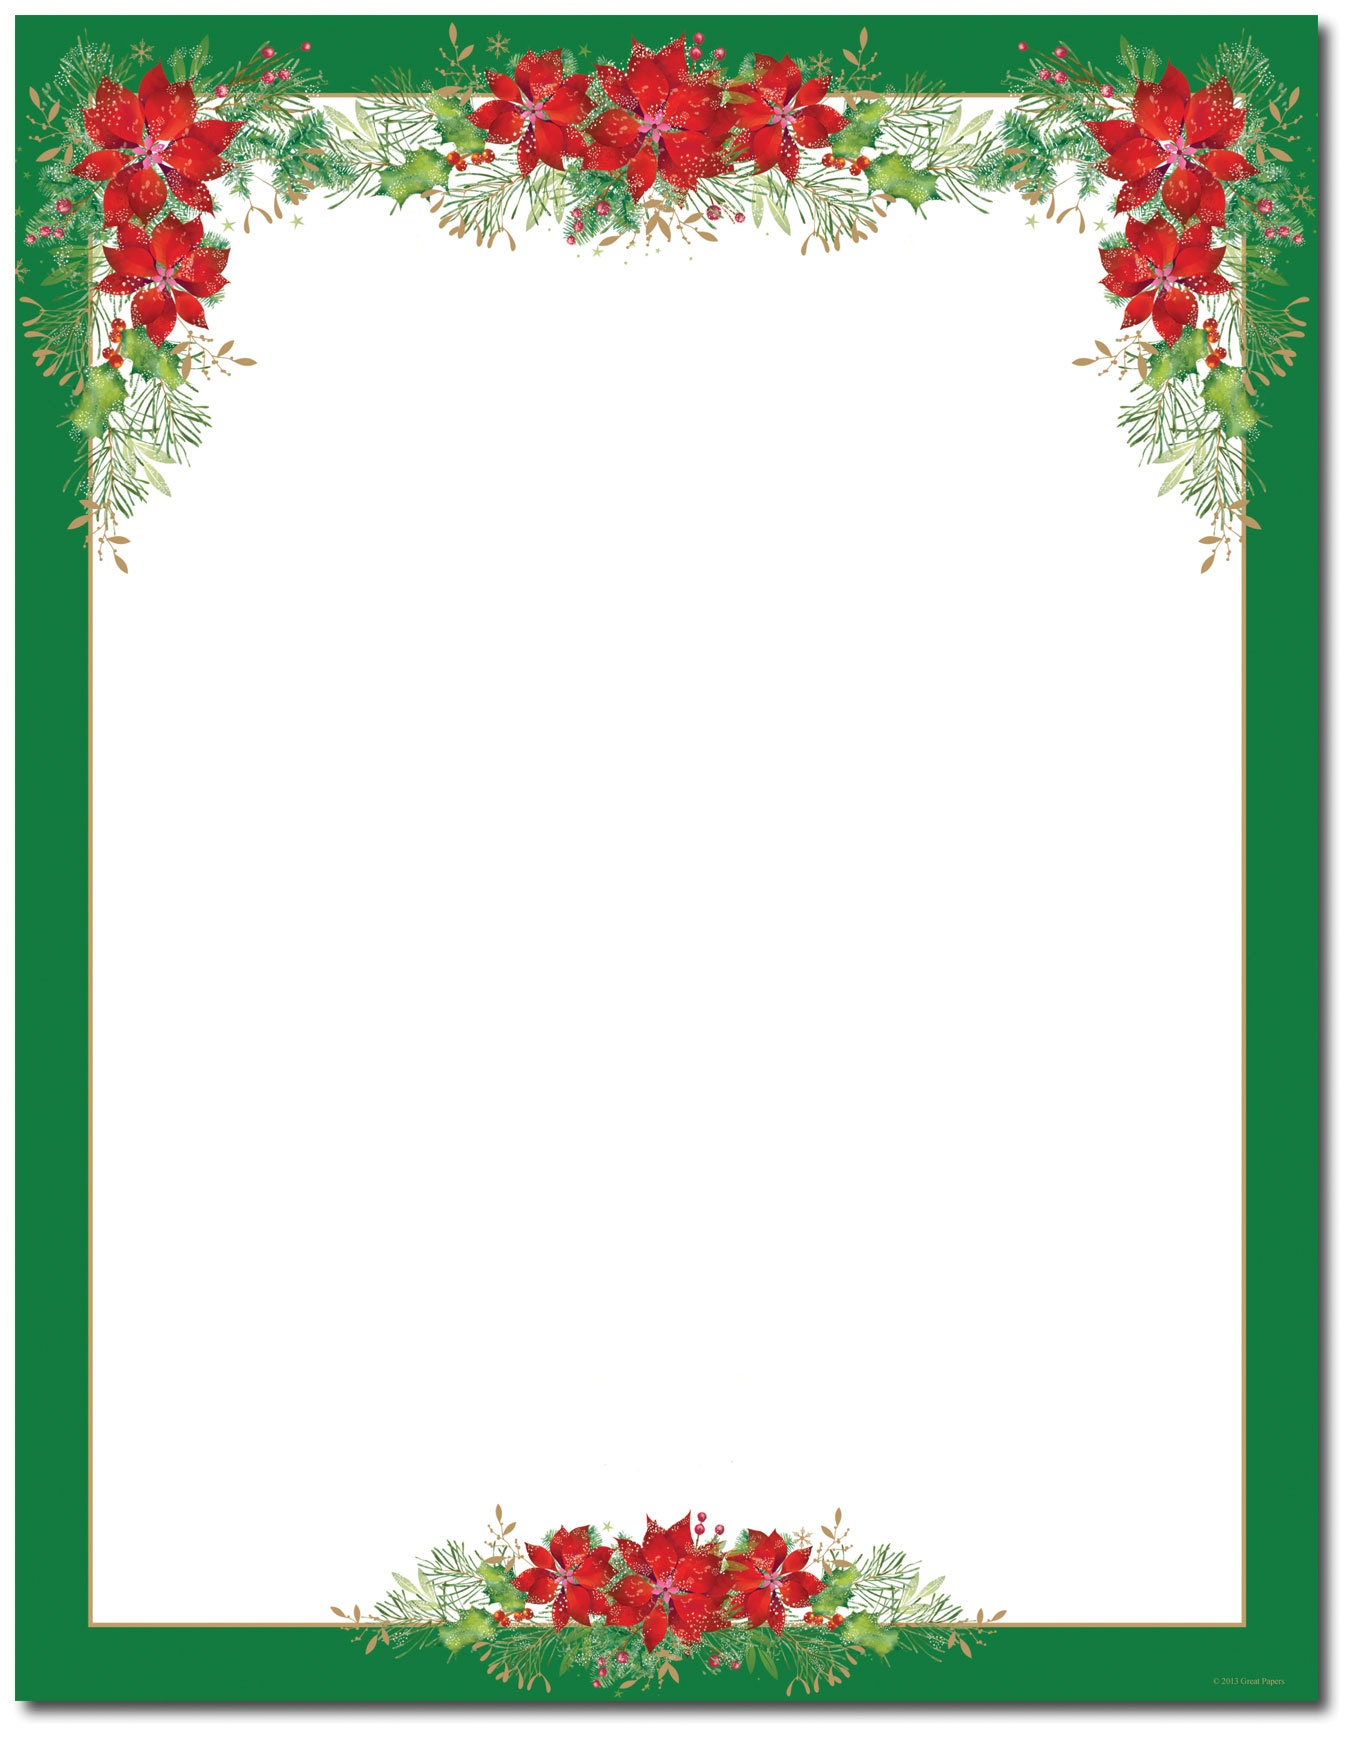 15 Poinsettia Page Border Designs Images - Free Printable Christmas - Free Printable Page Borders Christmas